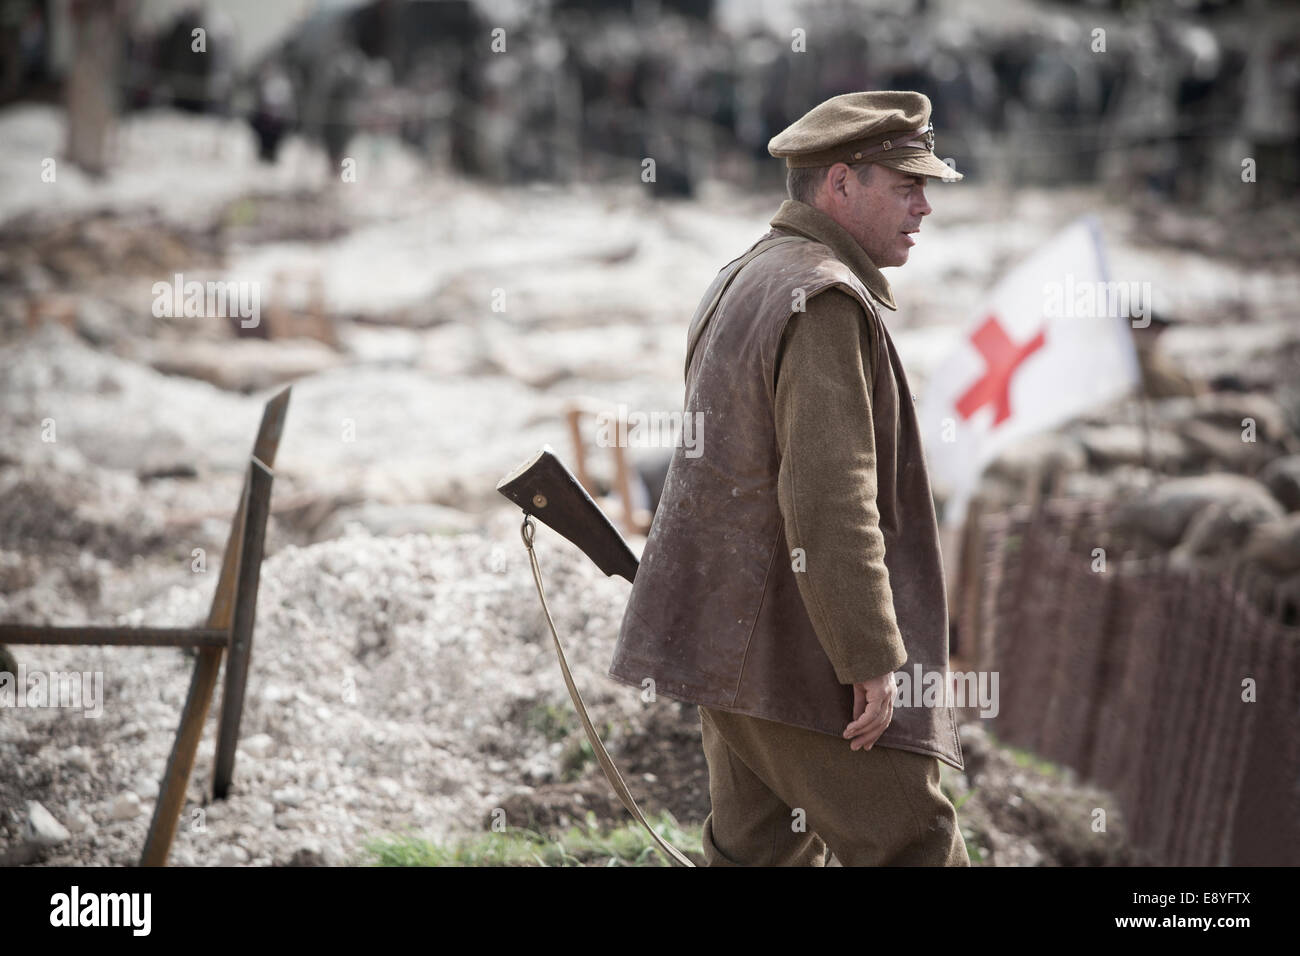 A man in WW1 British Army Soldier's uniform holding a rifle, stood by entrance to a trench. Stock Photo